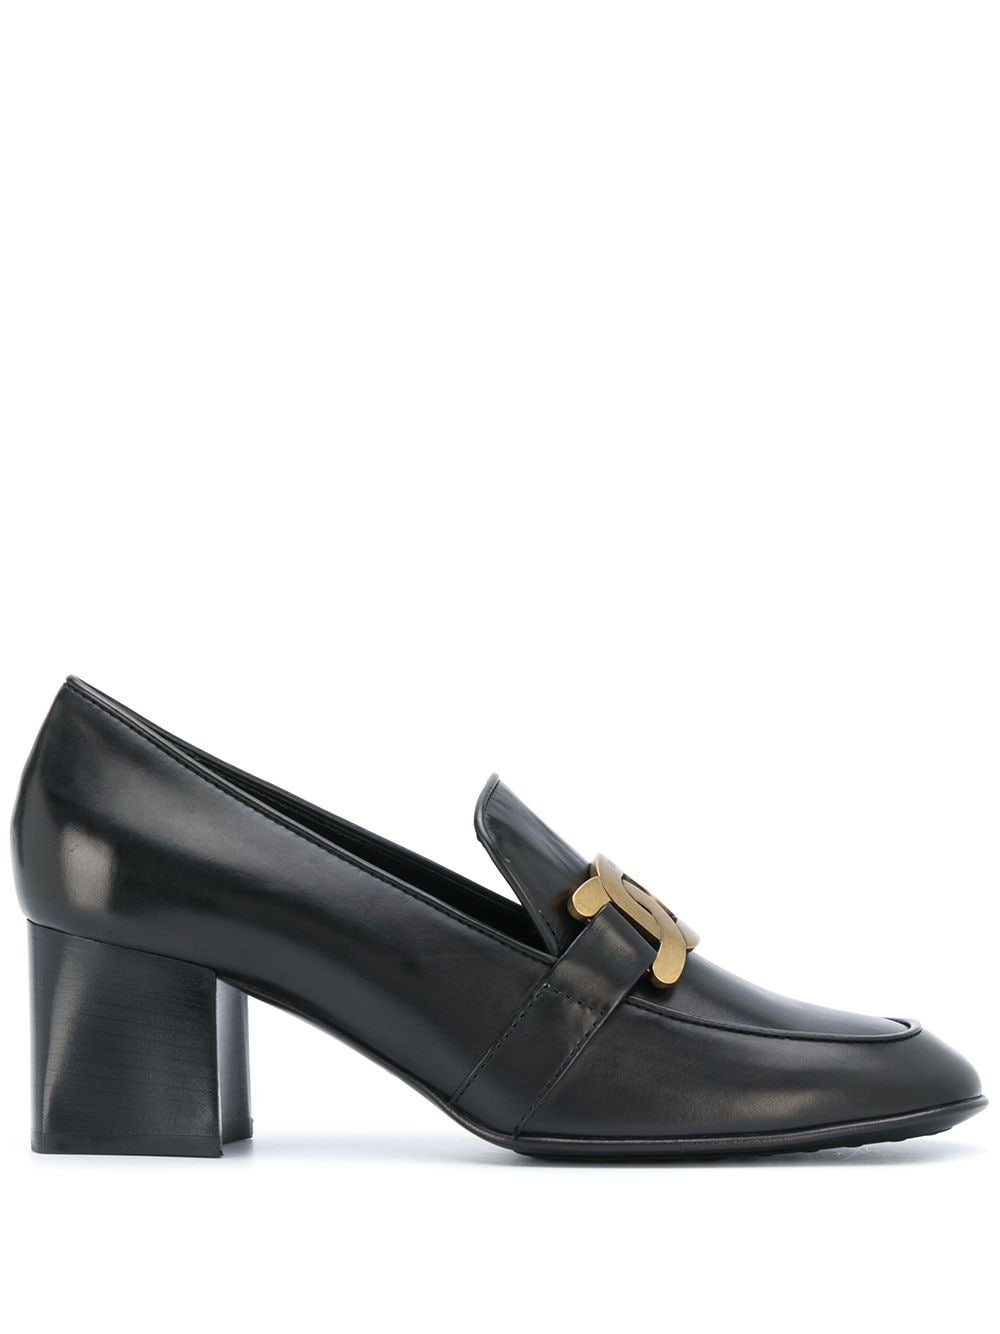 Tod's Kate pumps